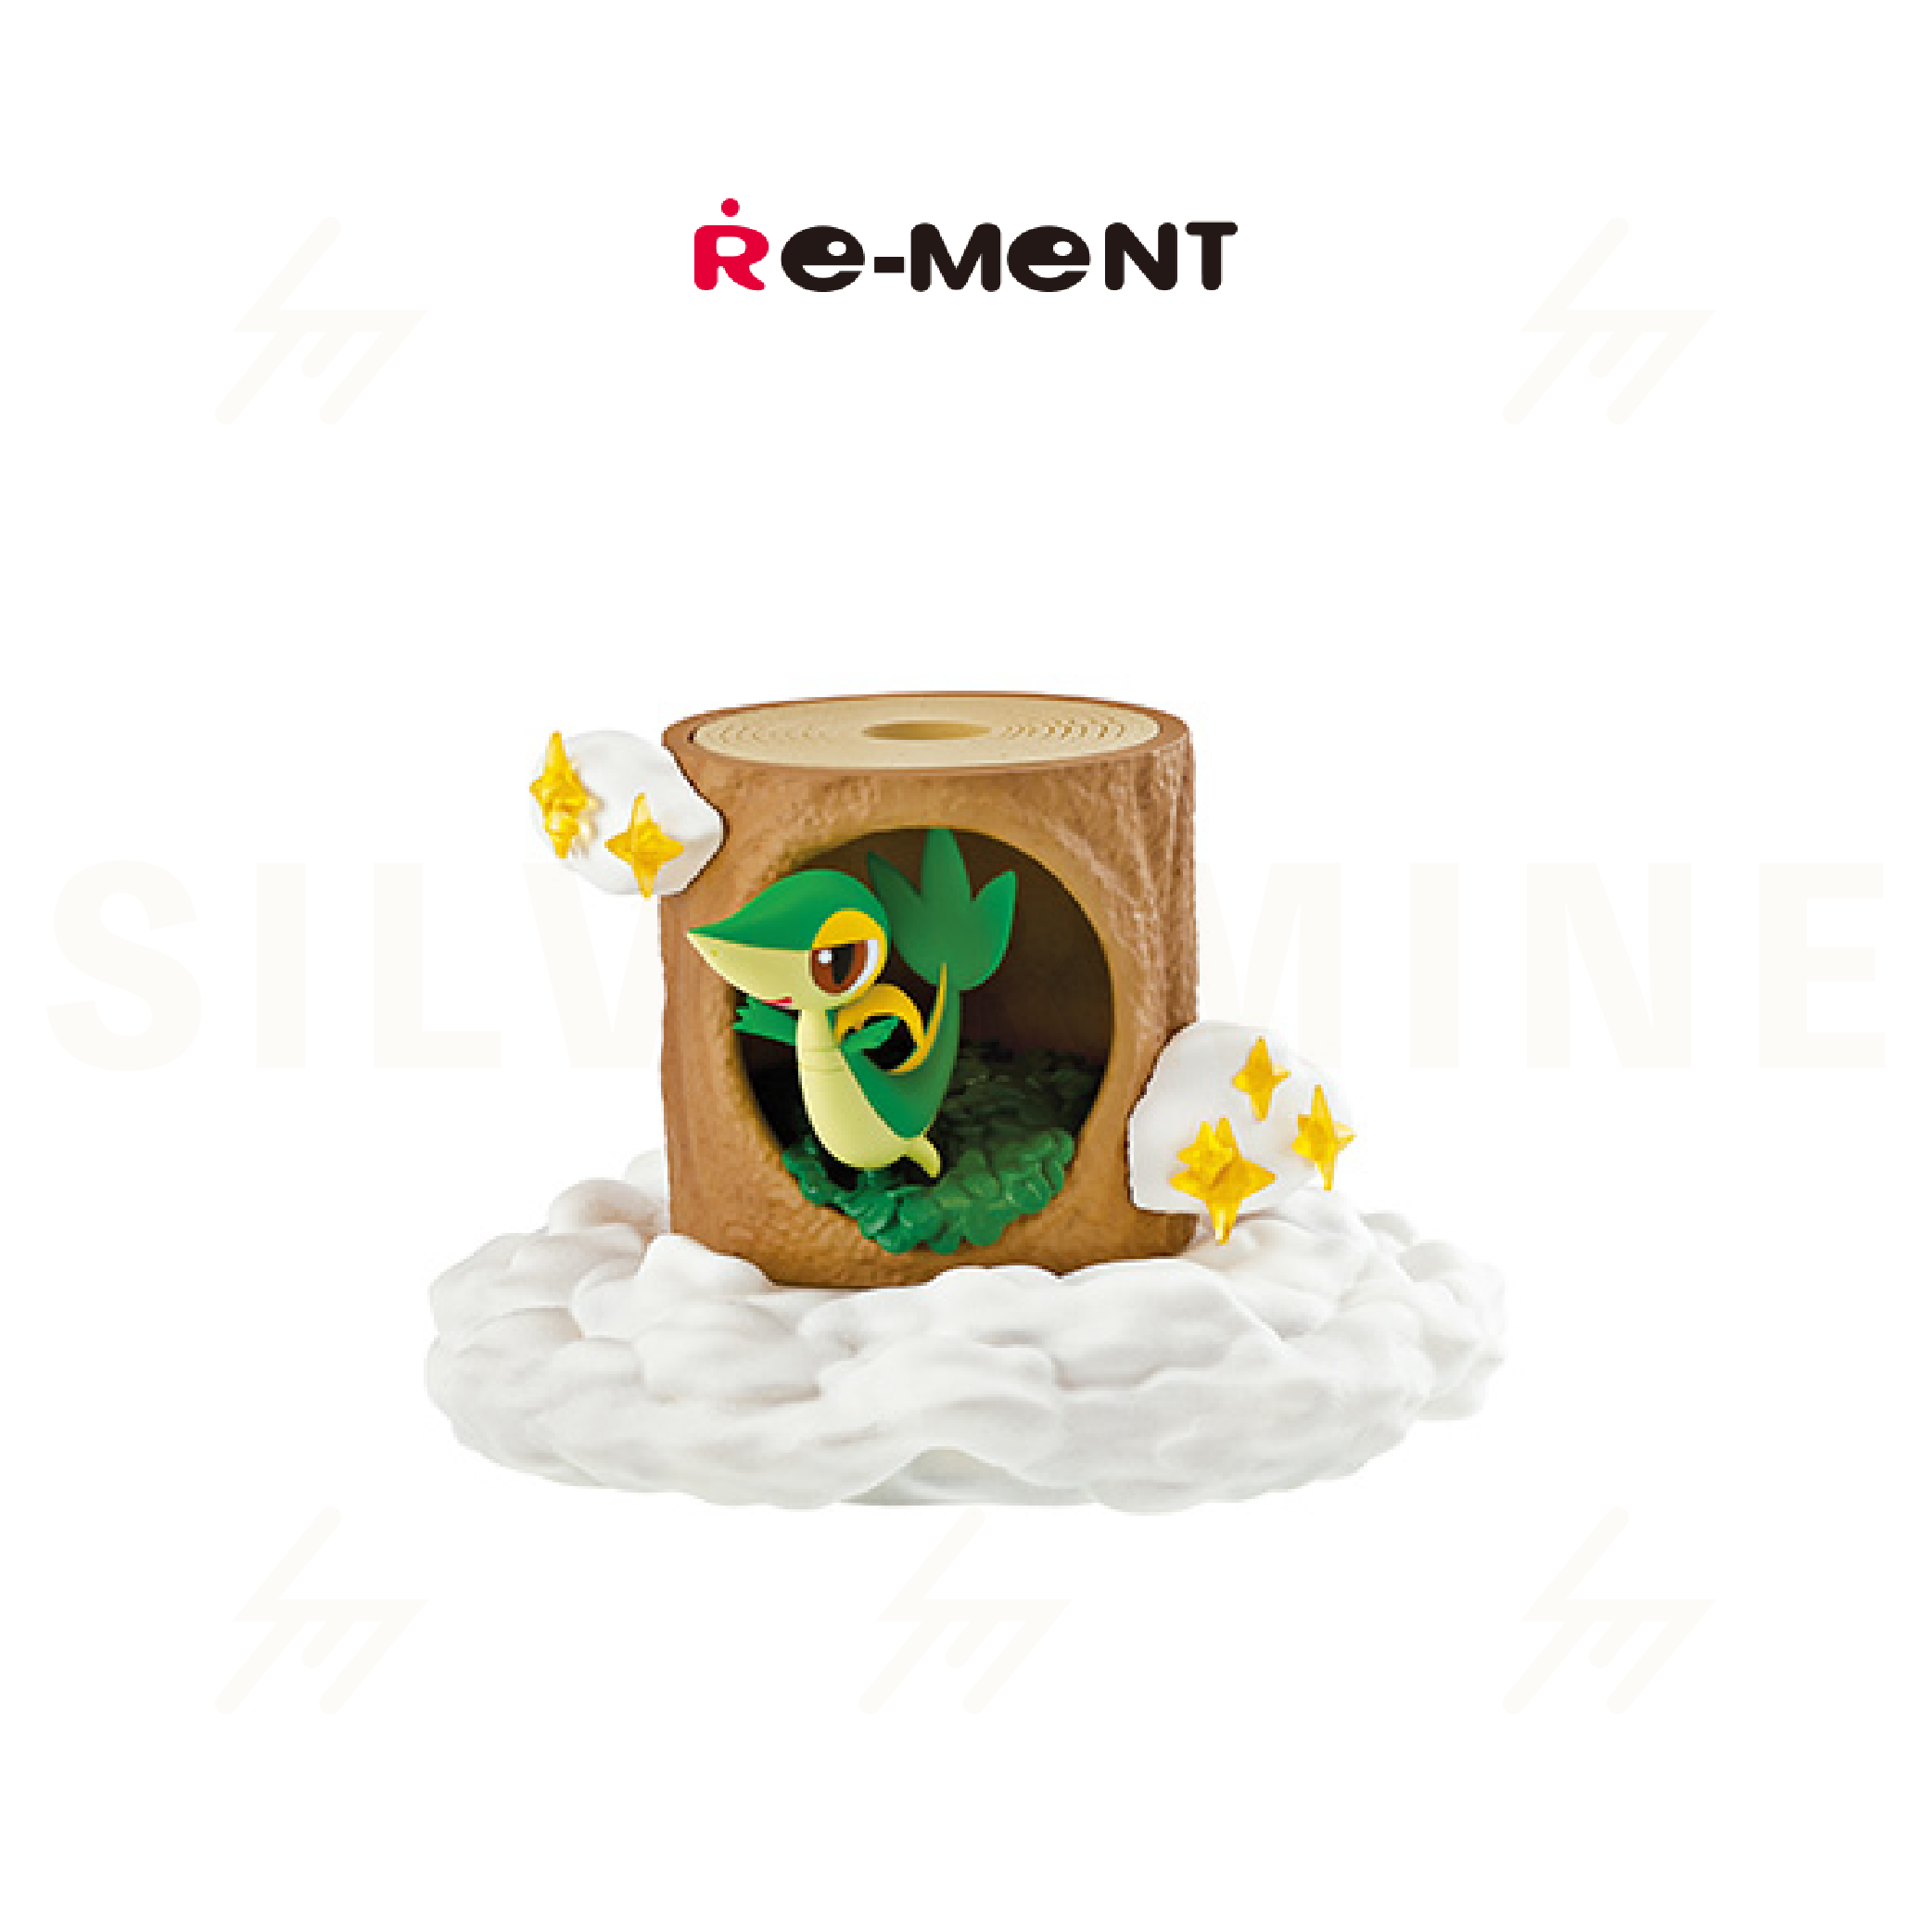 Re-Ment - Blind Box - Pokemon - Forest Collection 7